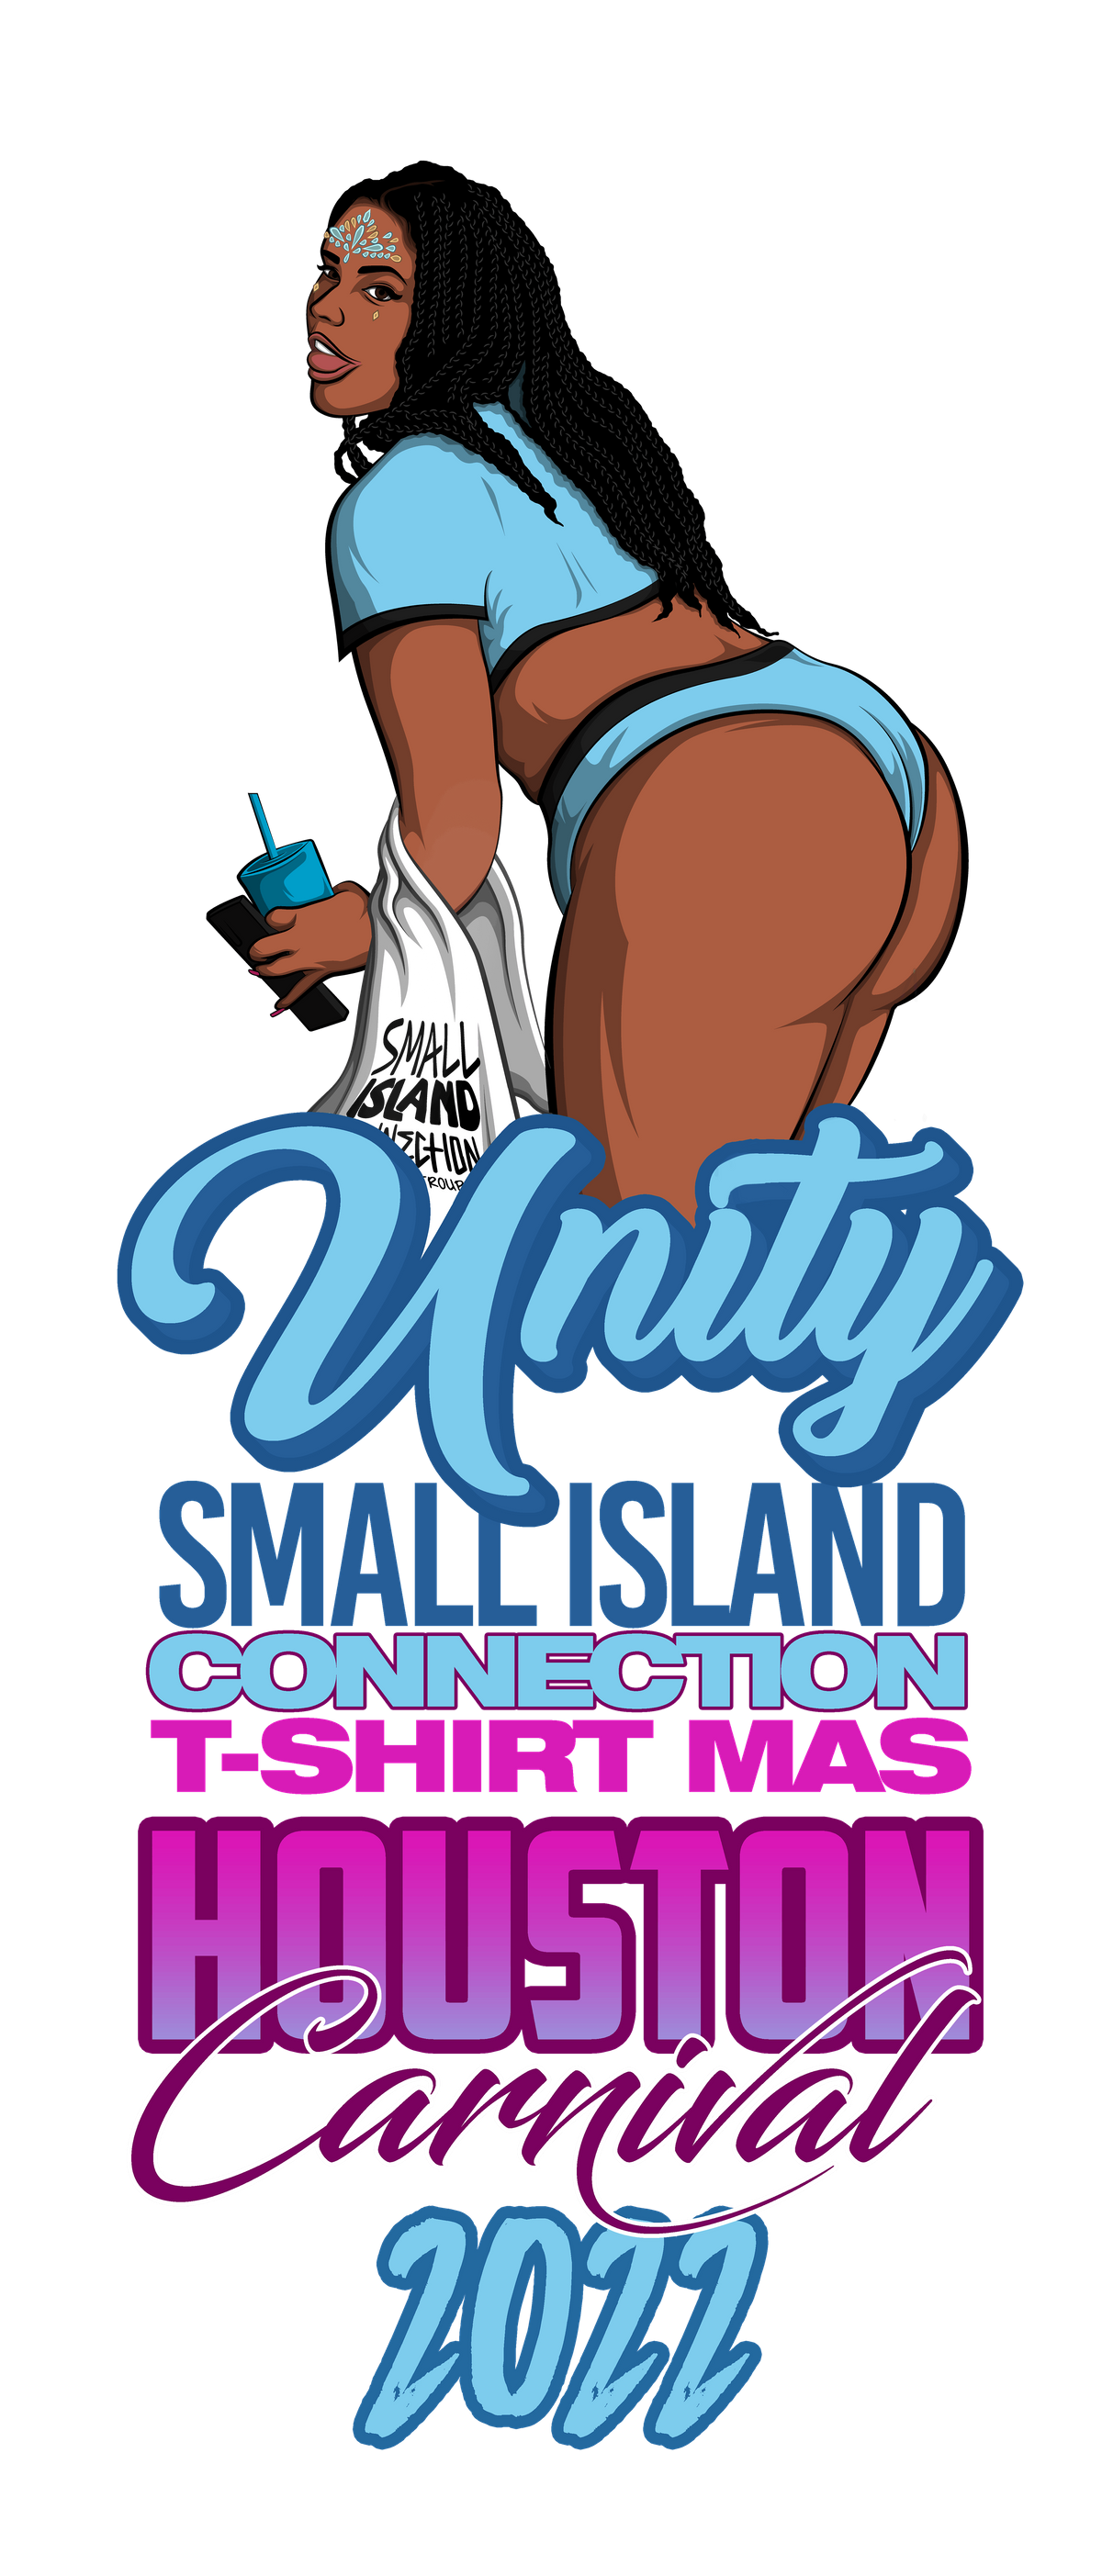 T-SHIRT MAS w\/ SMALL ISLAND CONNECTION 2022